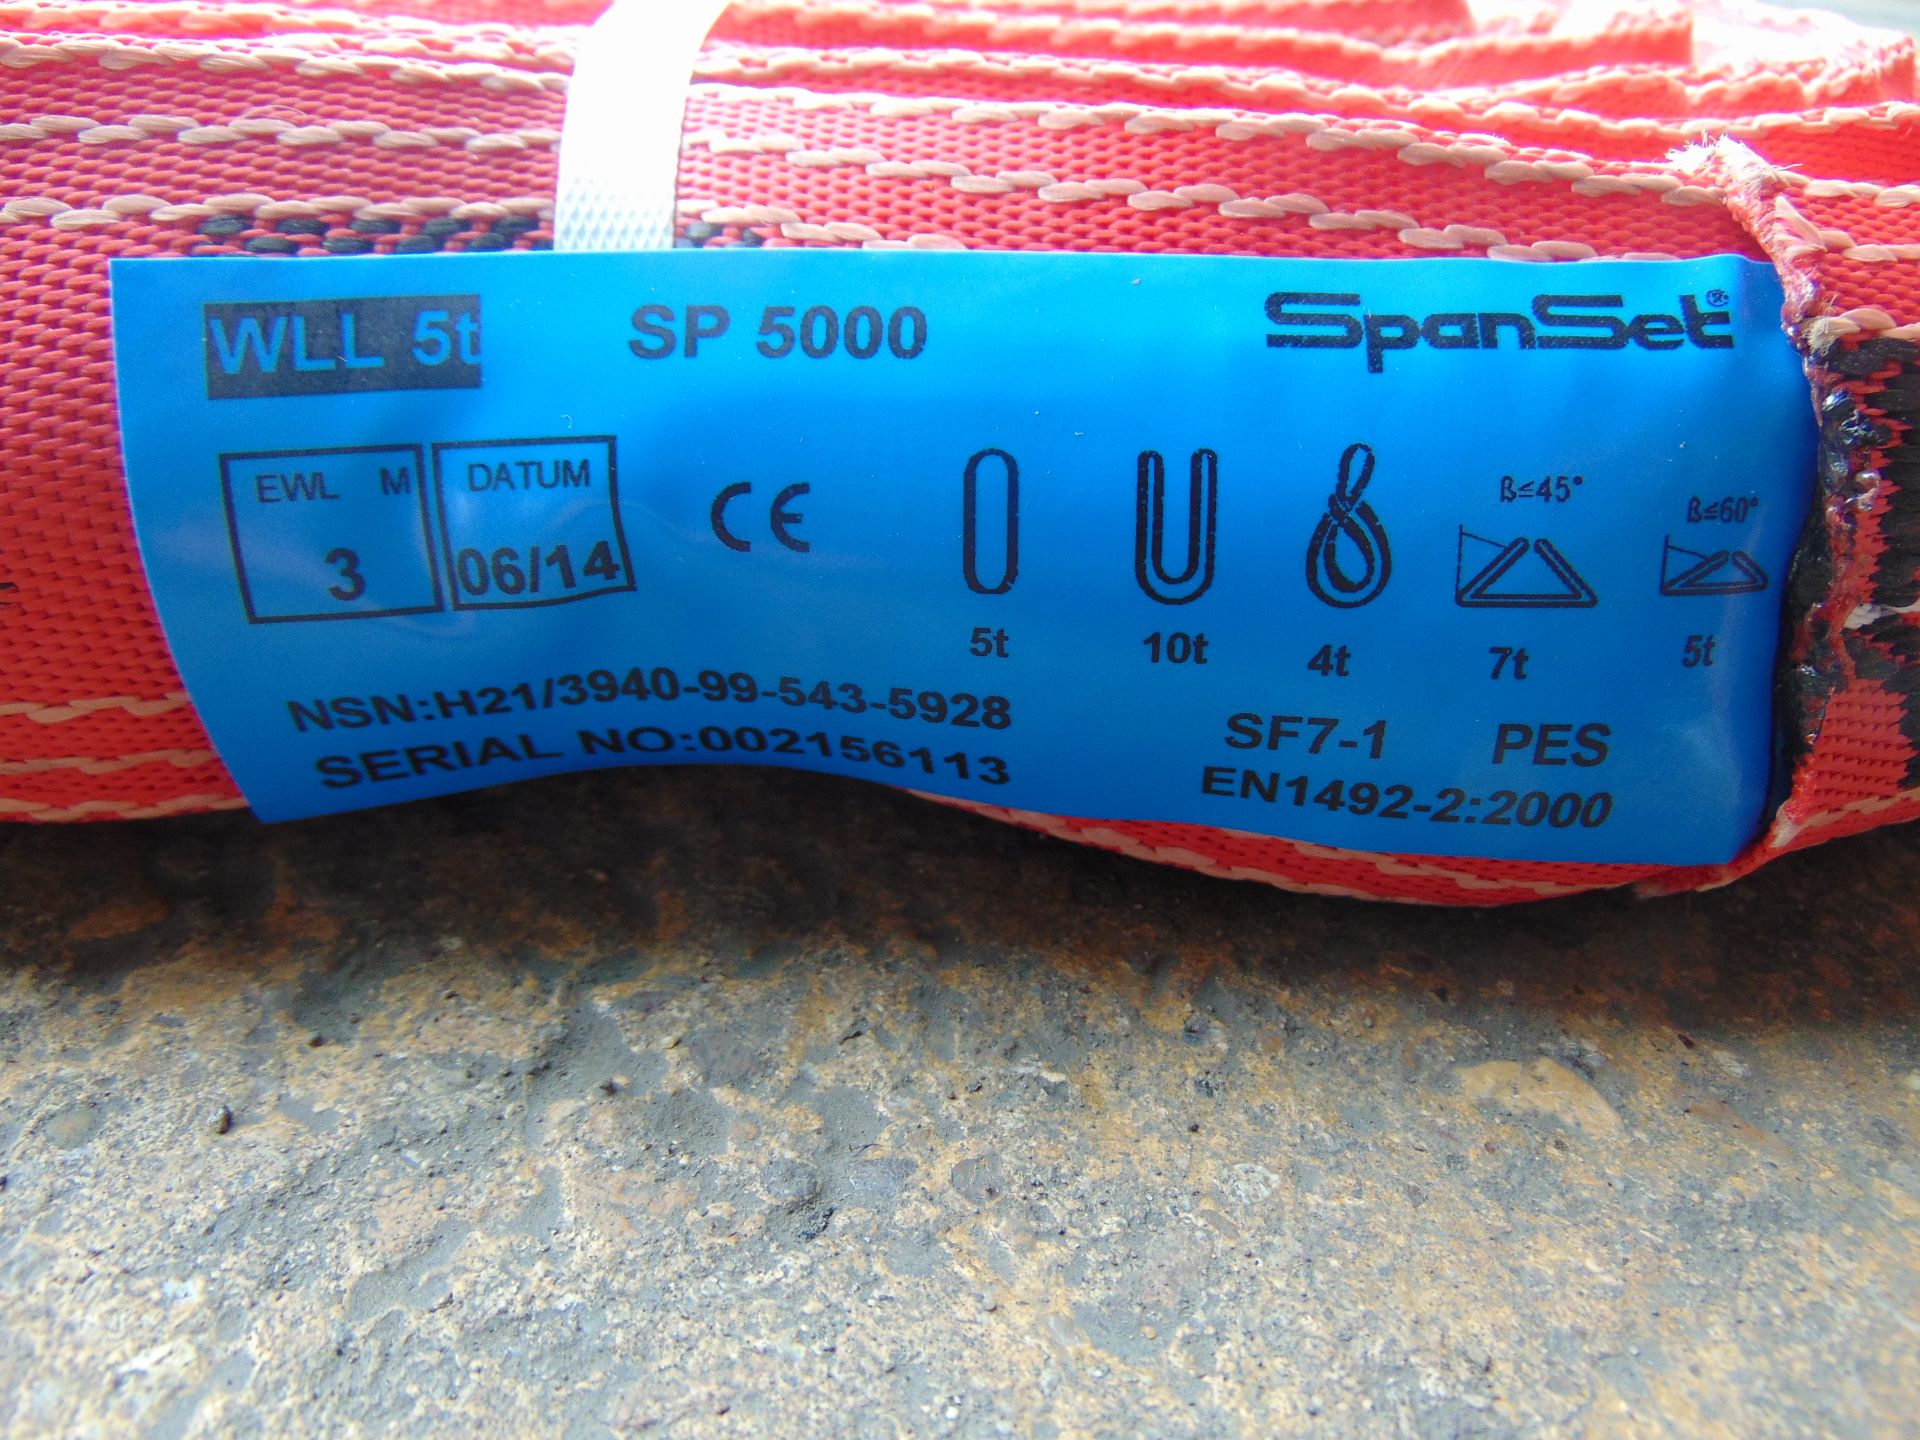 2 x Spanset 3m 5000 kilo Recovery Strops - Image 4 of 6